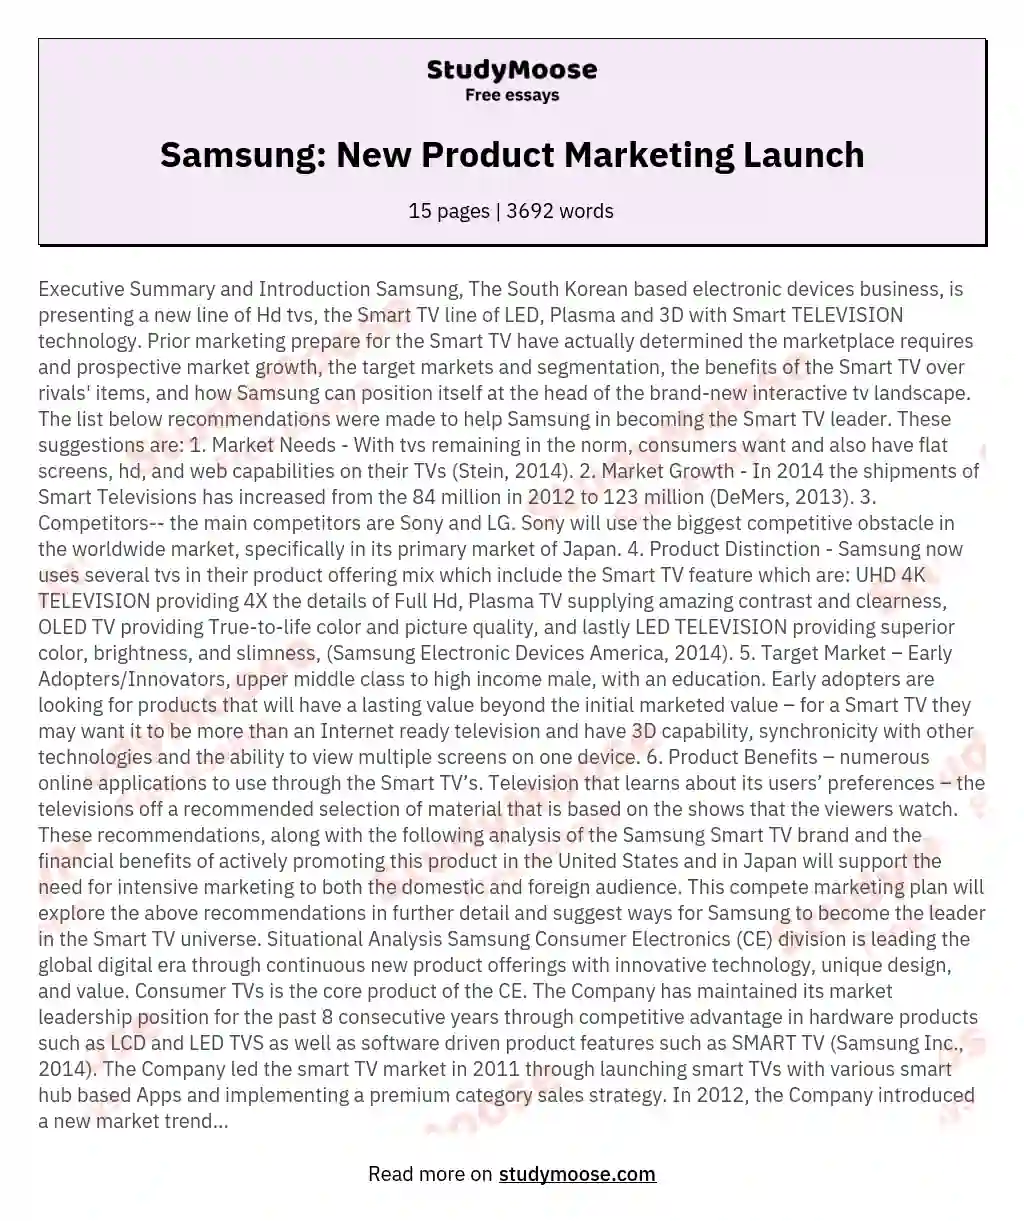 Samsung: New Product Marketing Launch